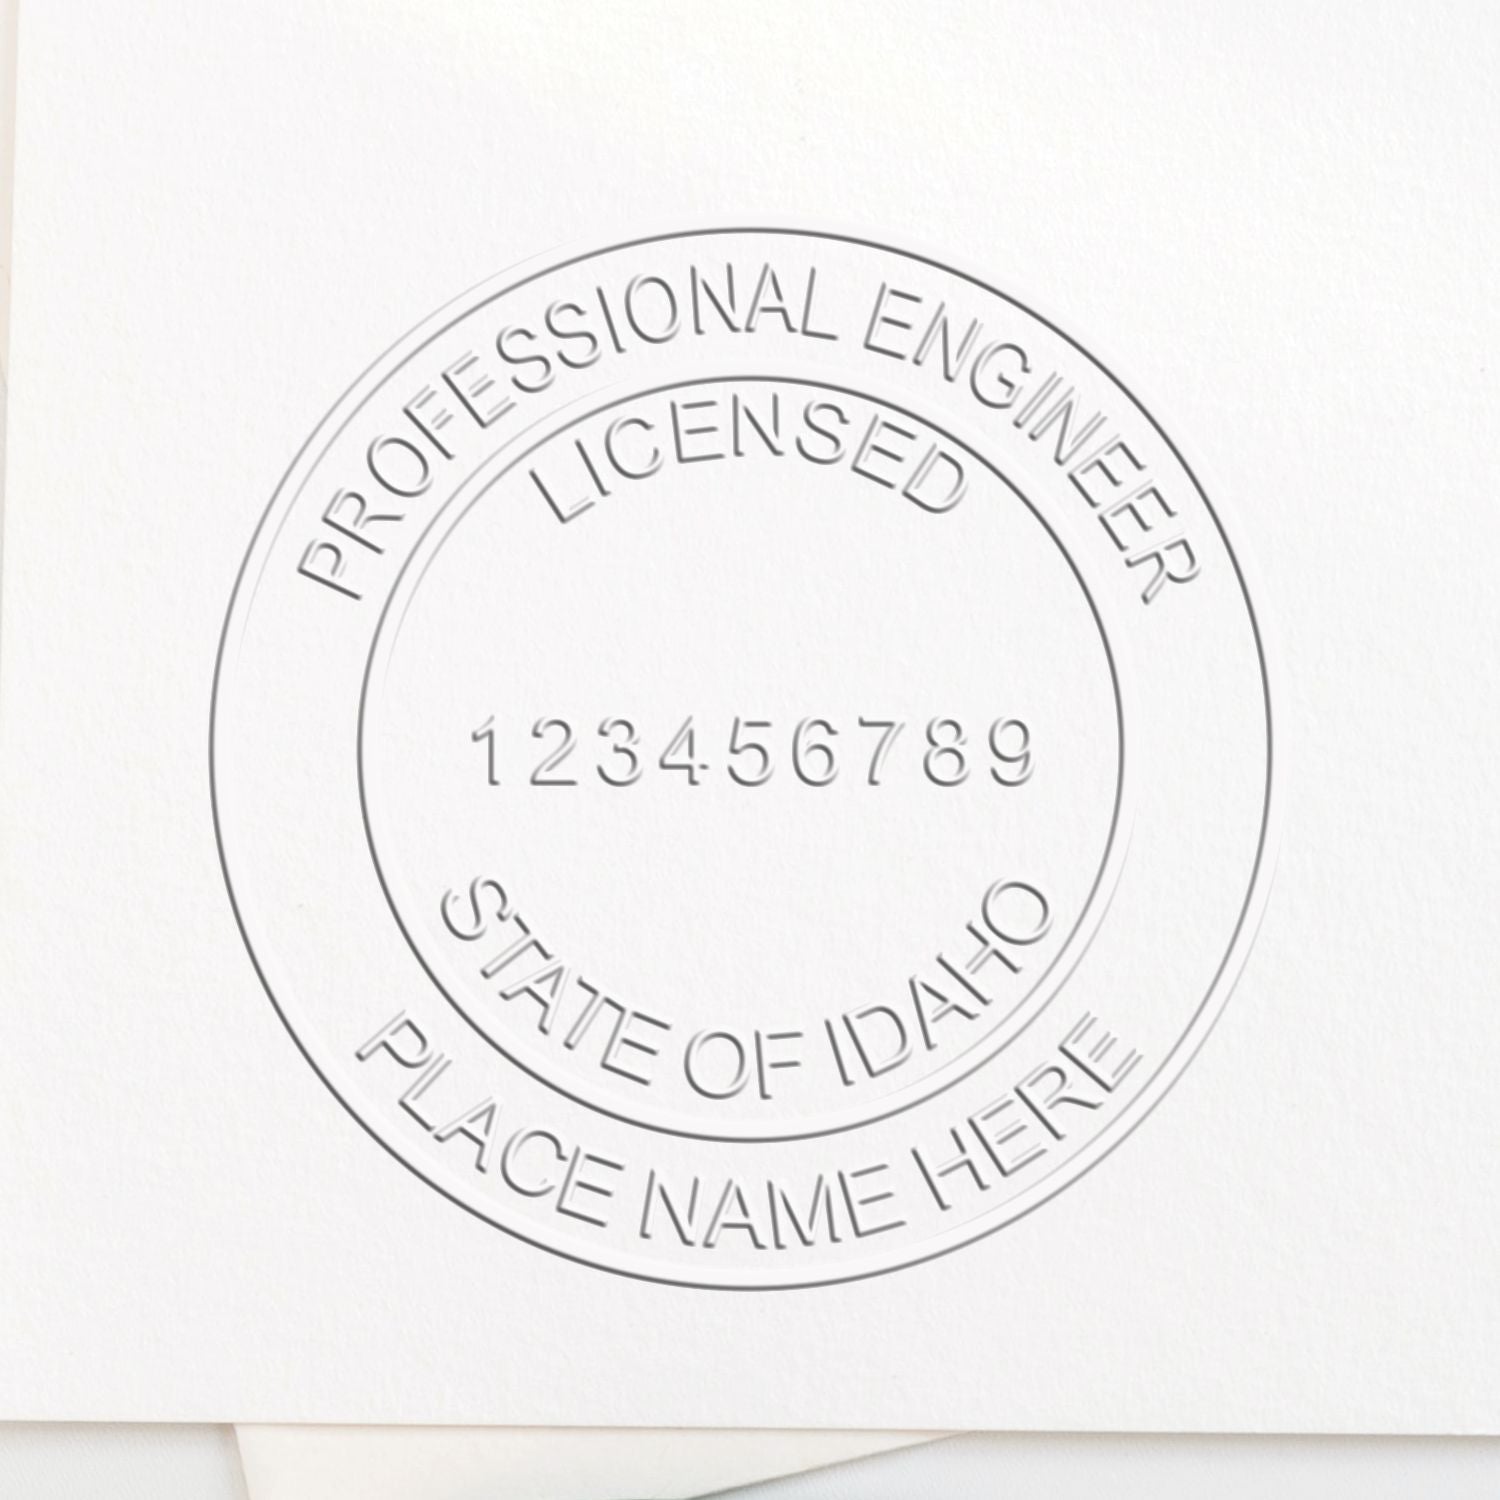 The State of Idaho Extended Long Reach Engineer Seal stamp impression comes to life with a crisp, detailed photo on paper - showcasing true professional quality.